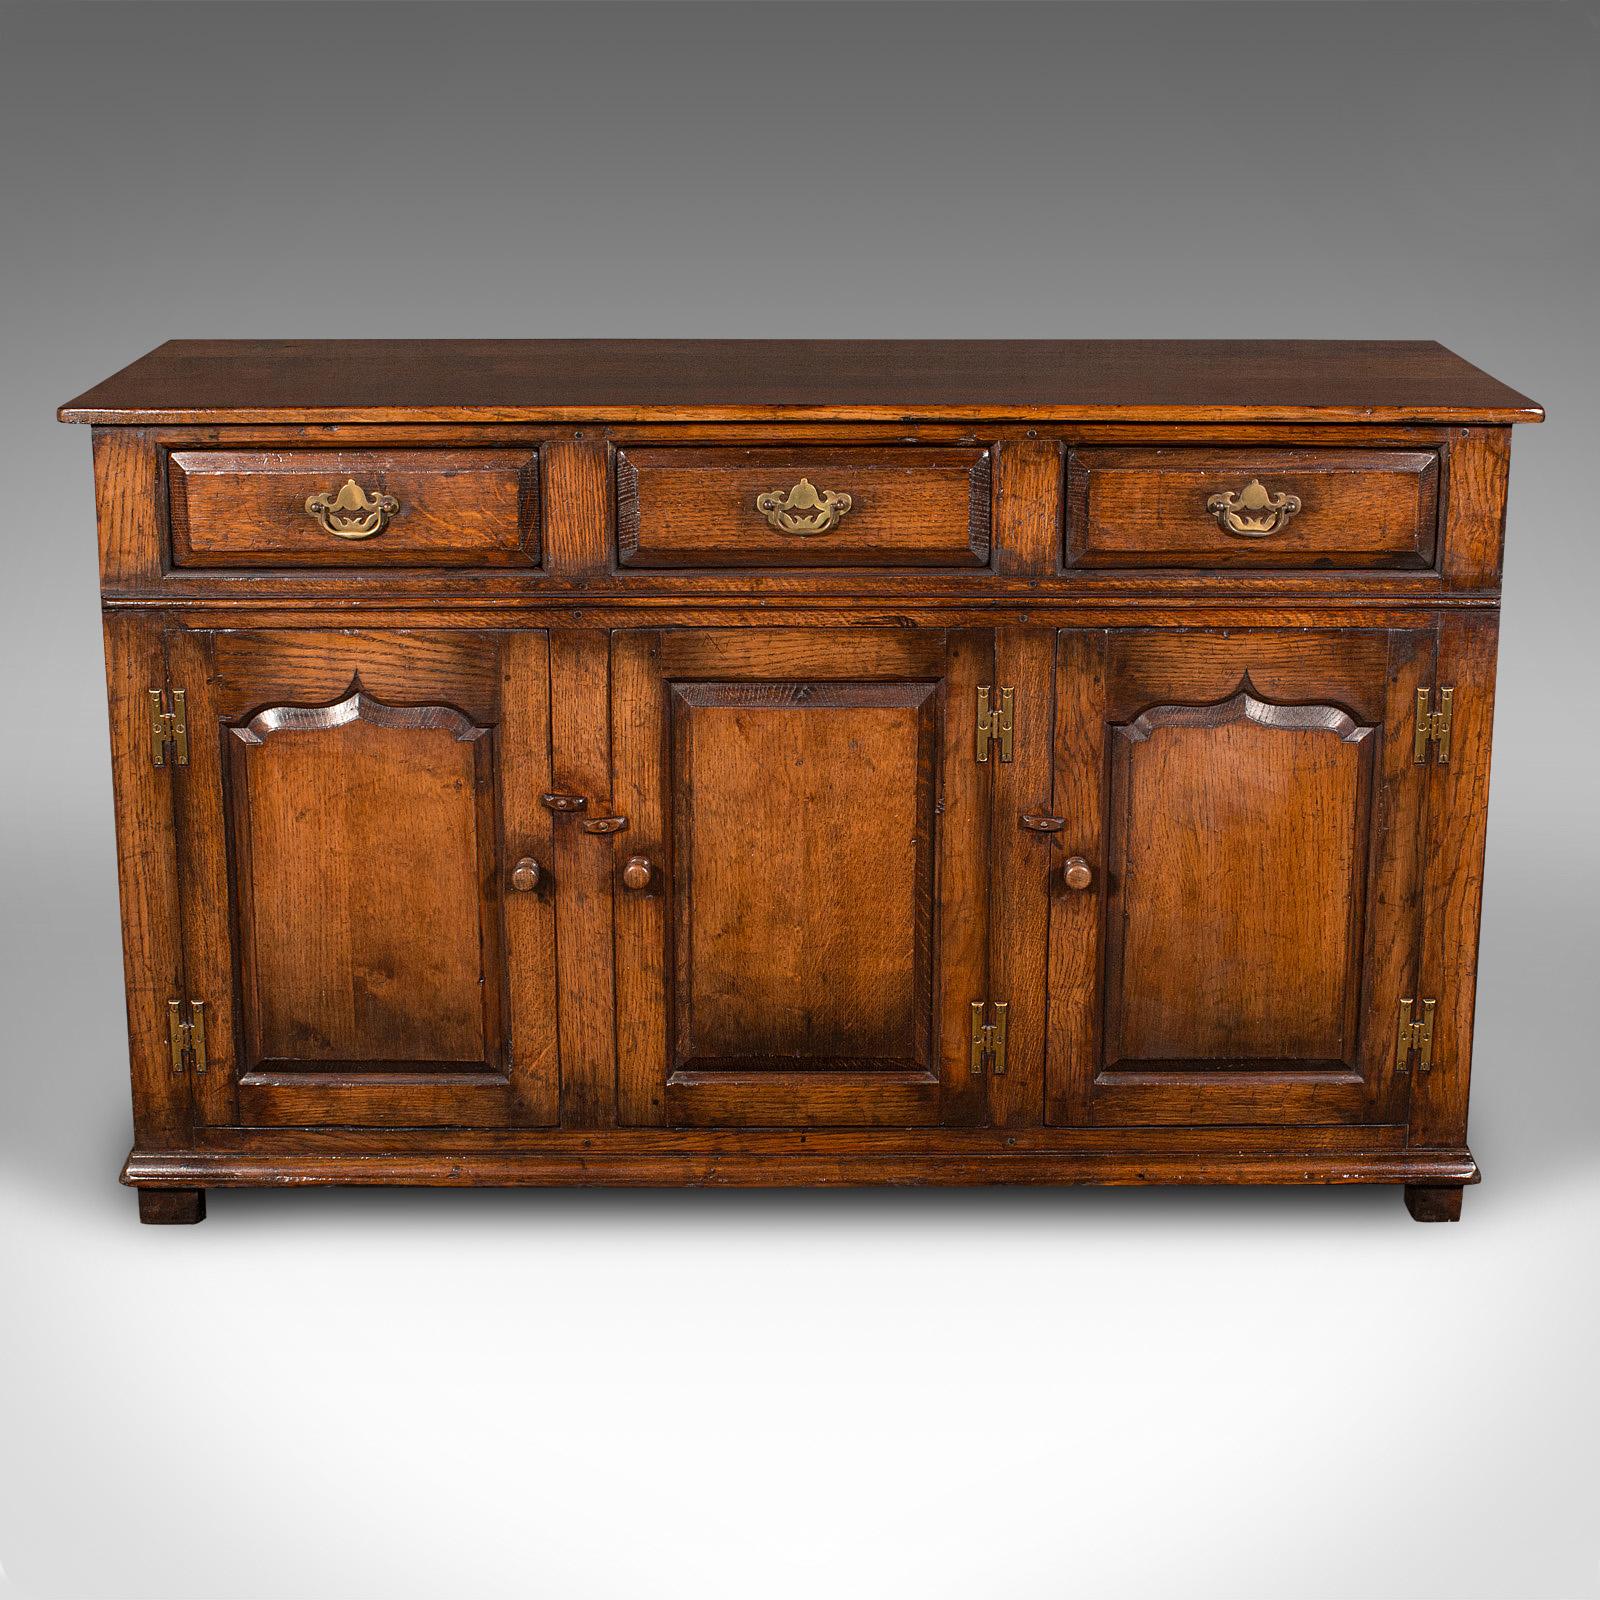 This is a vintage dresser base. An English, oak side cabinet in Georgian revival taste, dating to the late 20th century, circa 1970.

Traditional appeal with a fine Georgian revival taste
Displaying a desirable aged patina and in good order
Fine oak